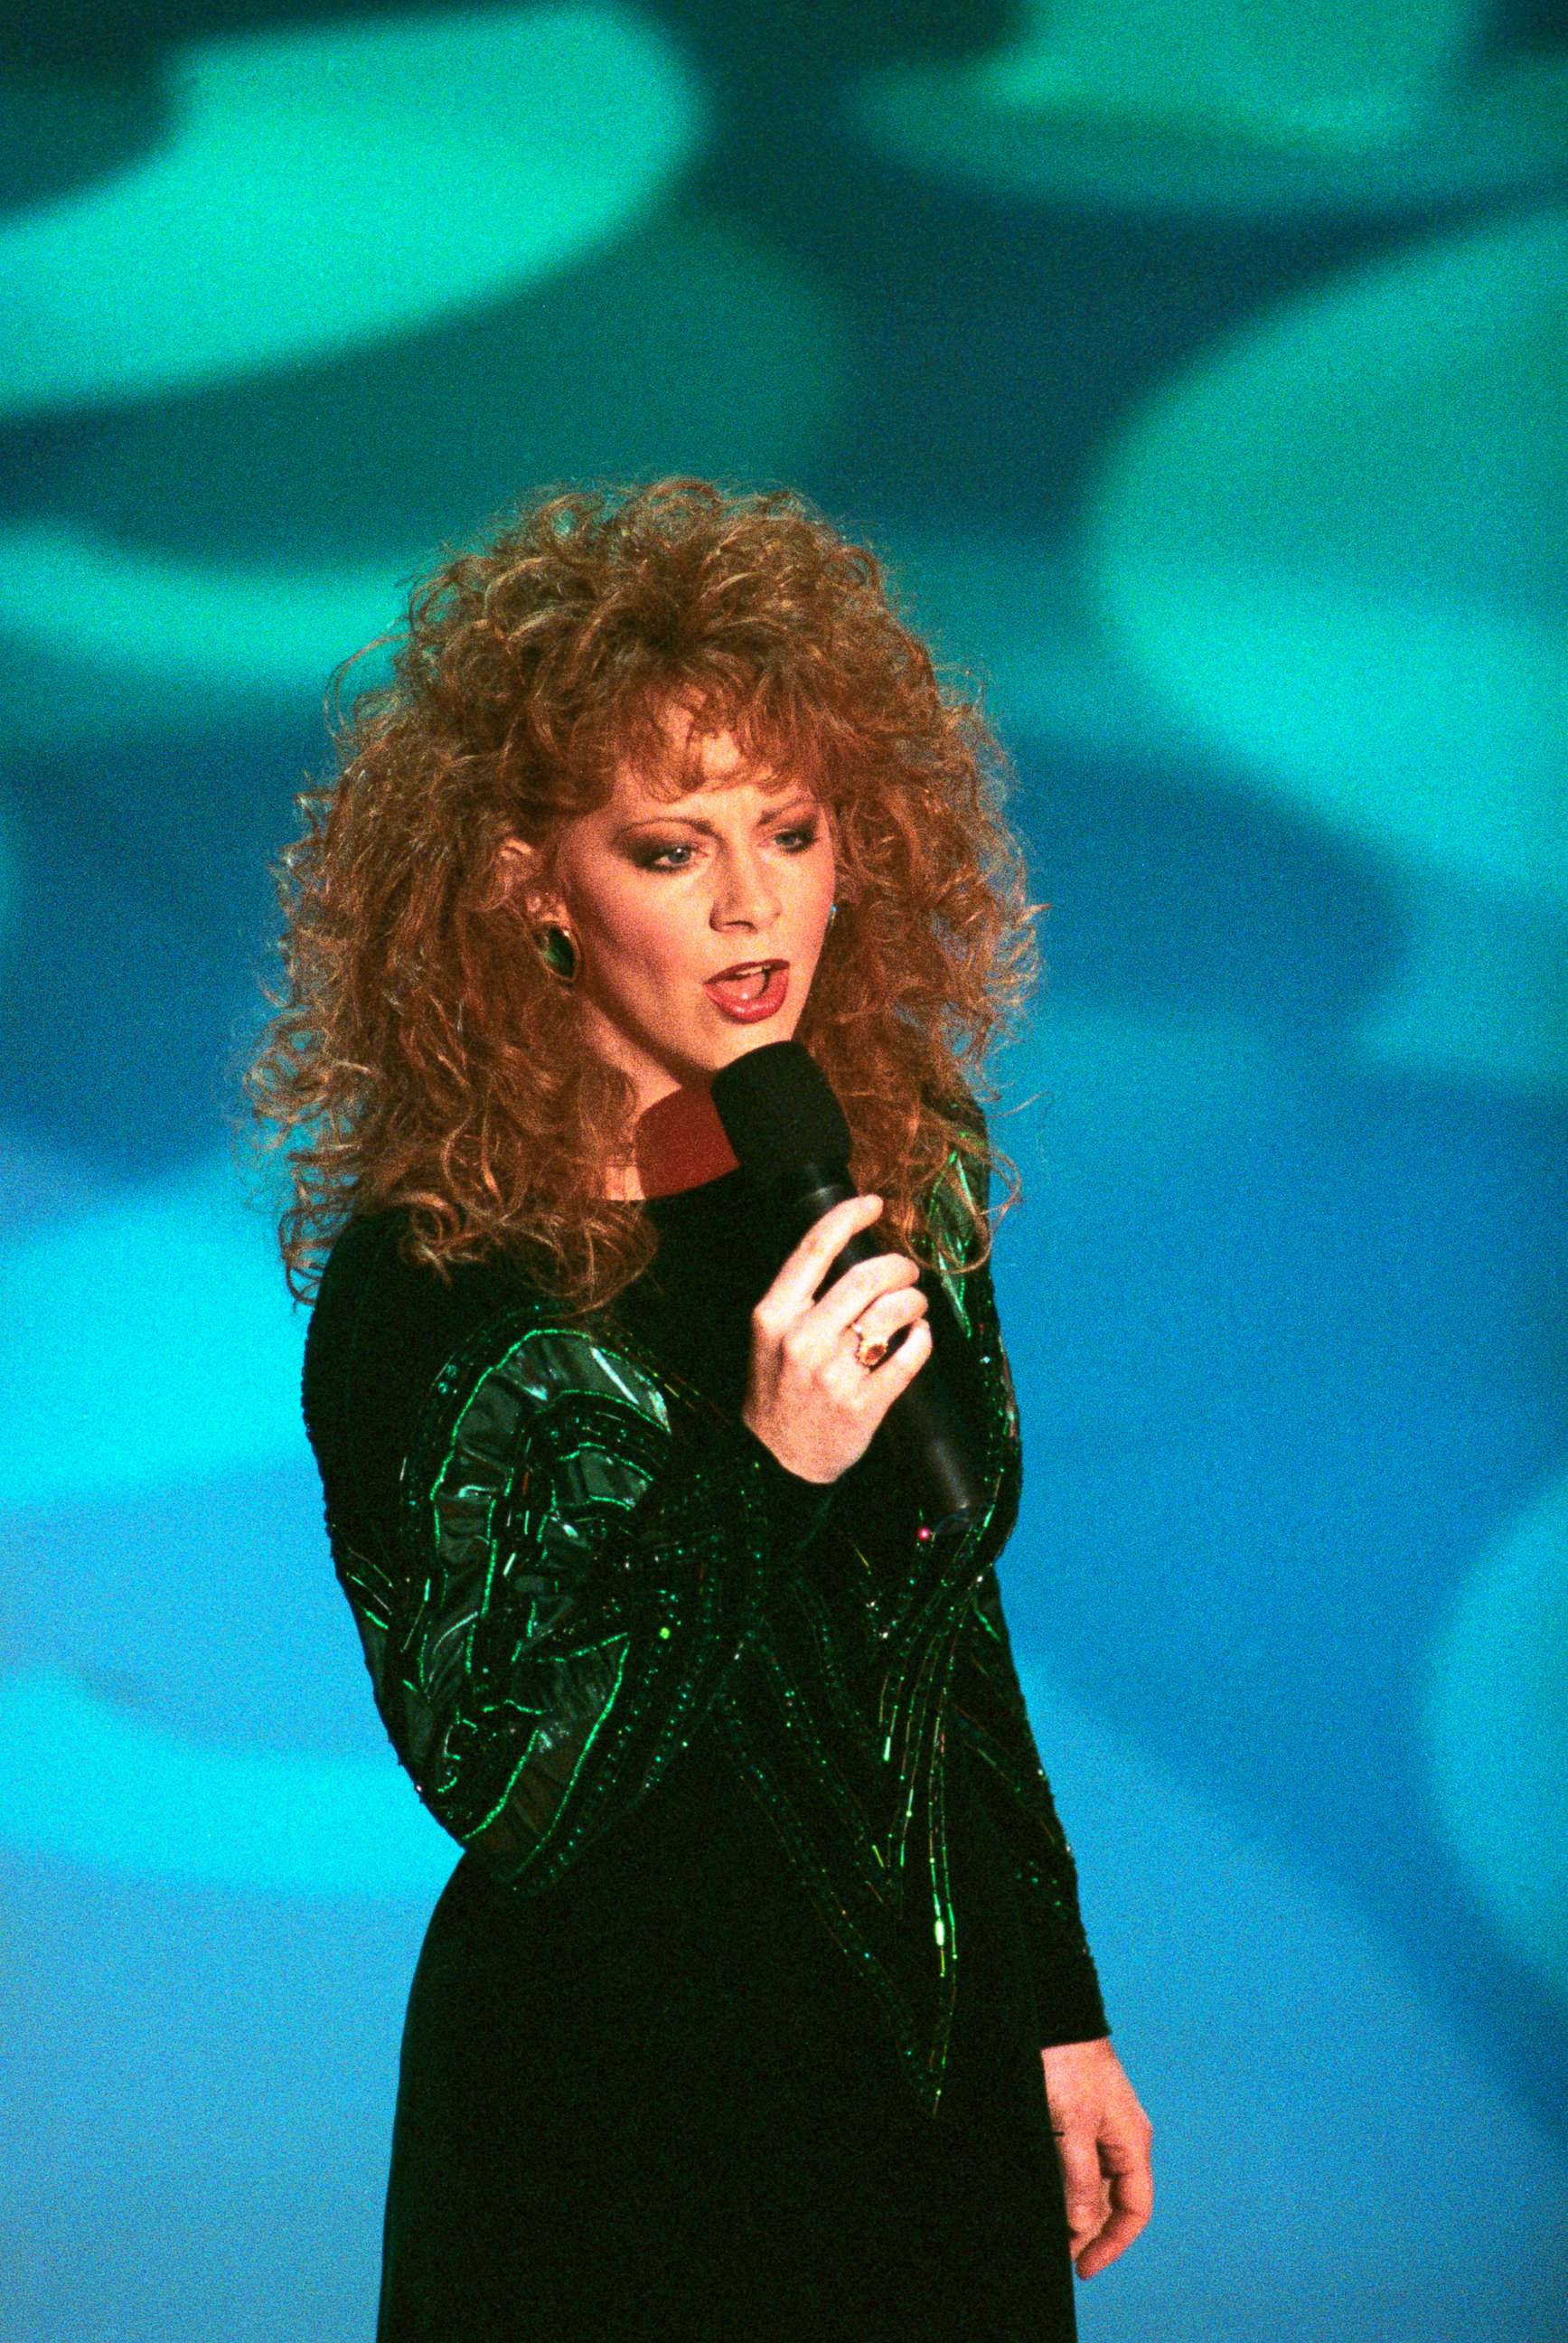 PHOTO: Singer Reba McEntire, who lost most of her band and crew in a tragic plane accident March 16, sings her Oscar-nominated song, "I'm Checkin' Out" from Postcards from the Edge at the 63rd Academy Awards in Los Angeles, March 24, 1991.